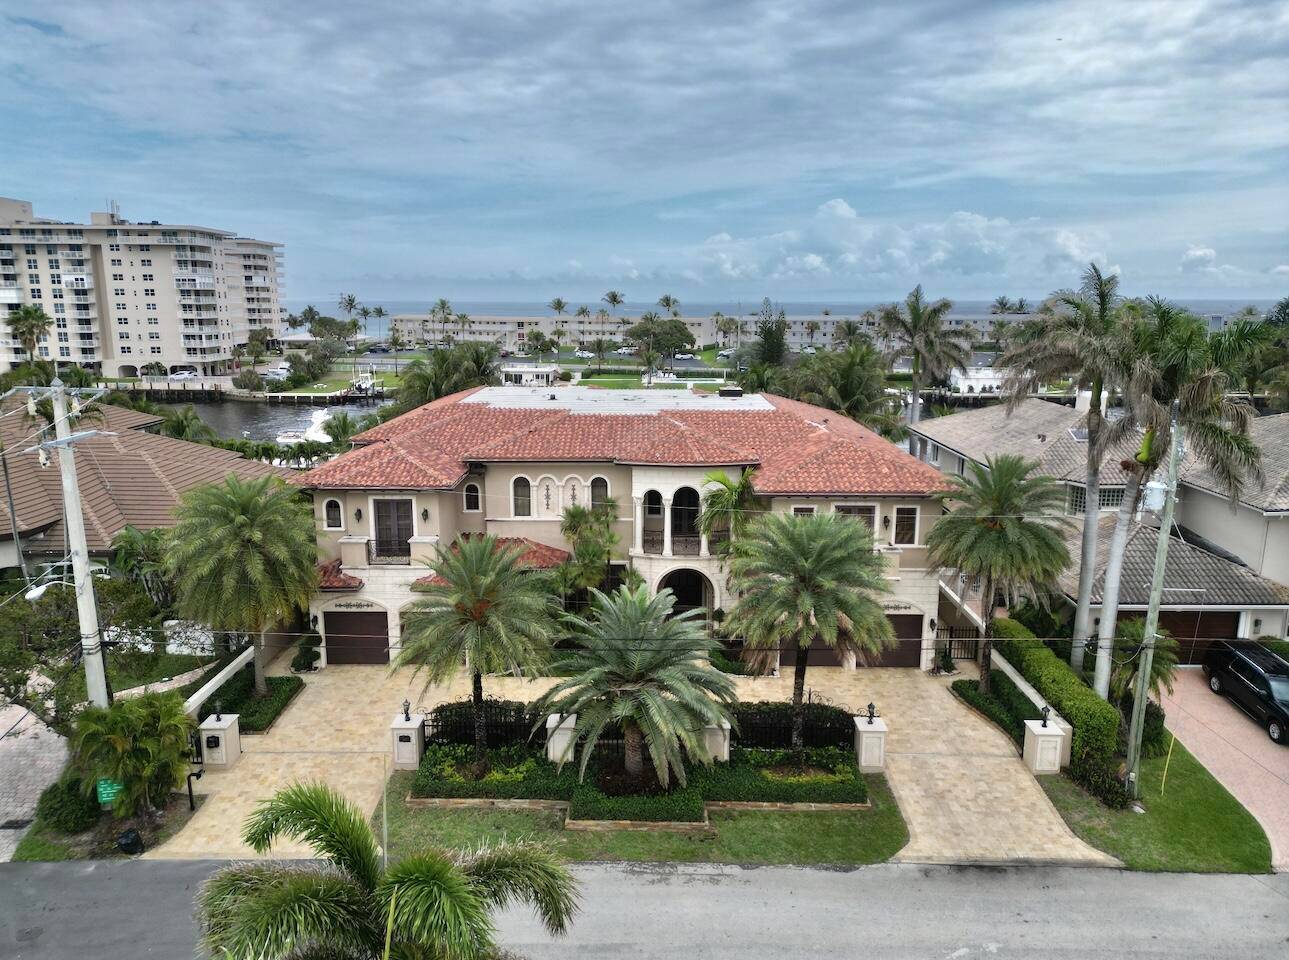 Simply spectacular 65279 ; waterfront estate directly on the Intracoastal in the ''NO WAKE'' zone located only 1 mile north of Hillsboro Inlet and is a boaters dream.